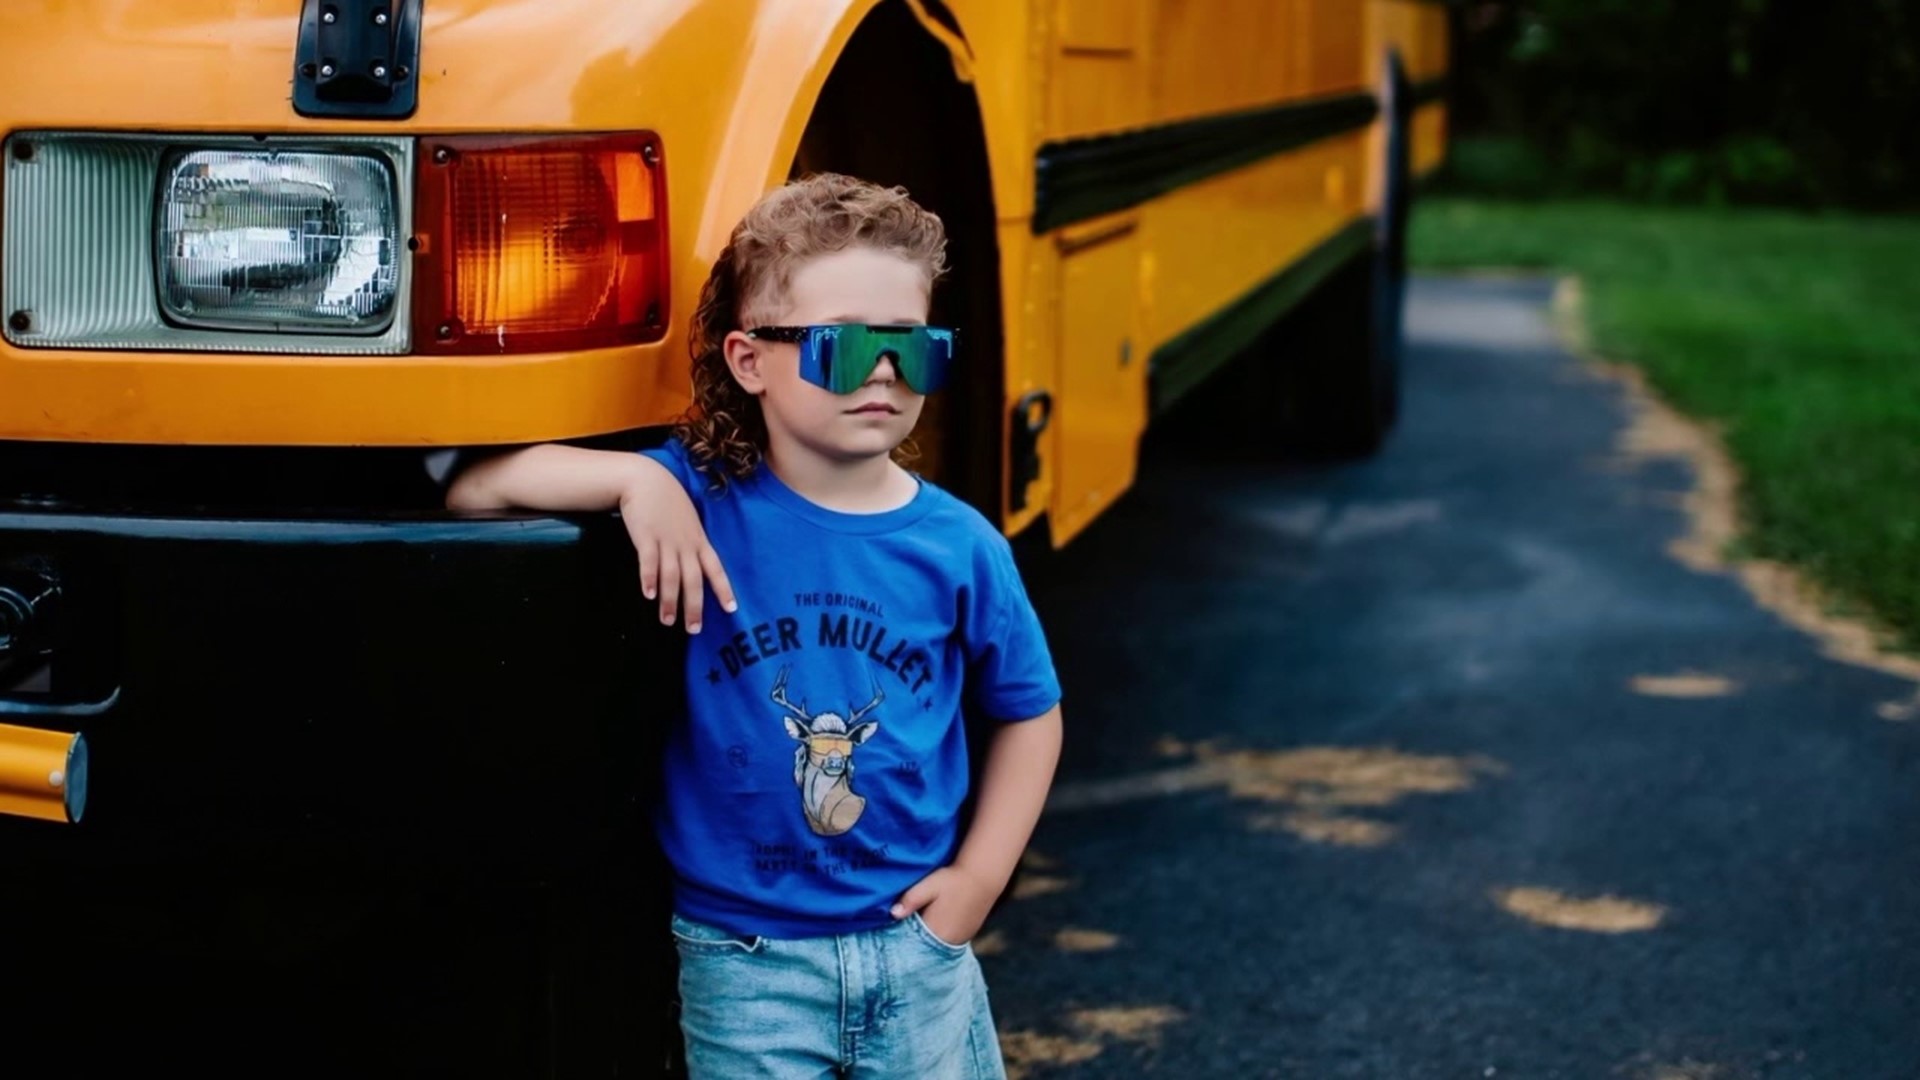 A five-year-old Swoyersville boy is looking to win a mullet competition, and he means business.